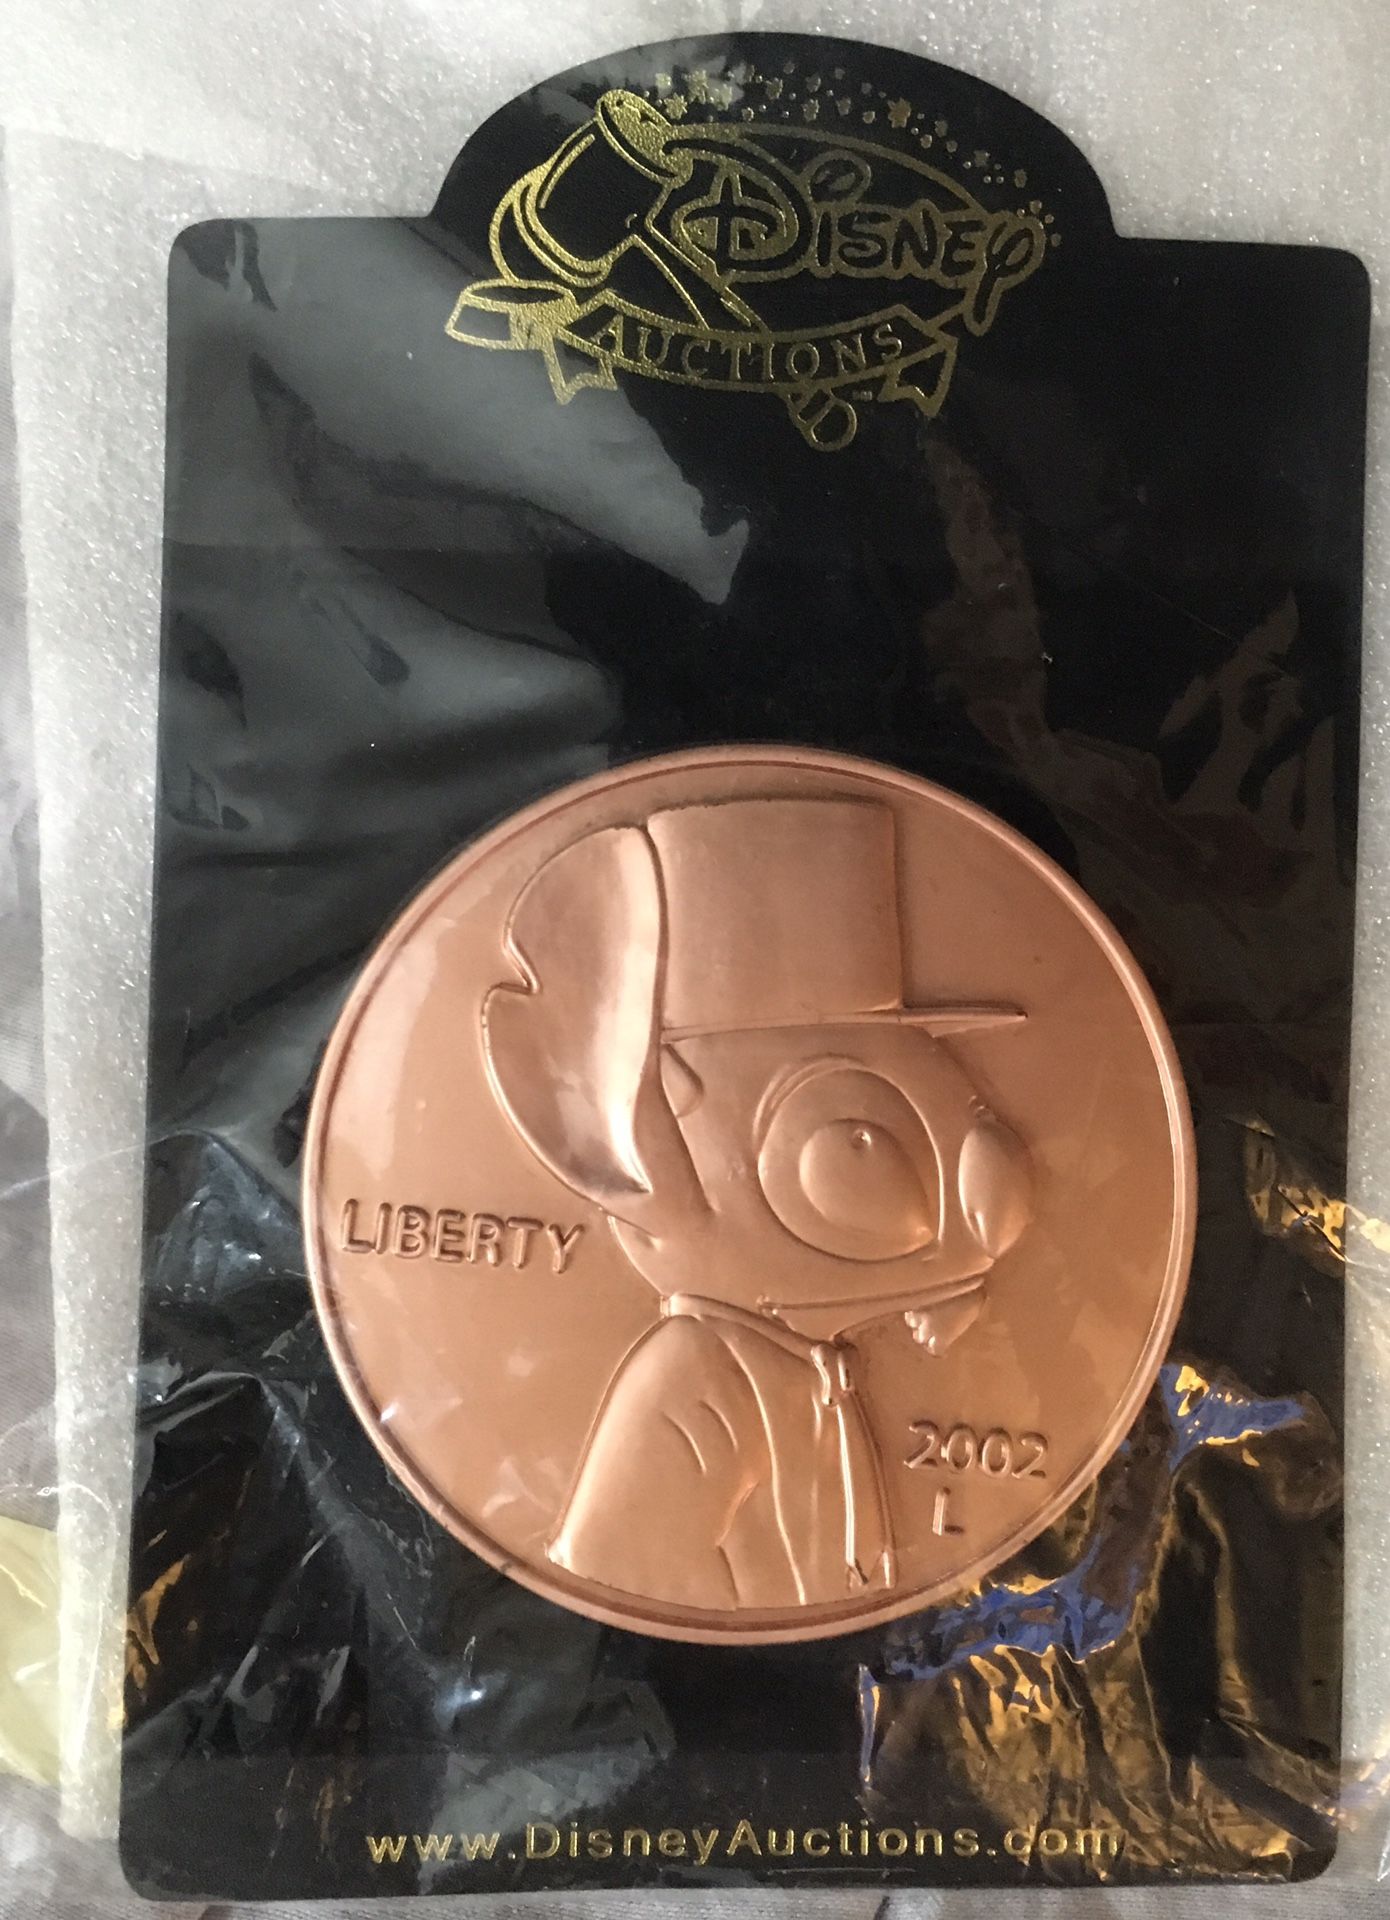 Disney Auctions Stitch as Abraham Lincoln Jumbo pin